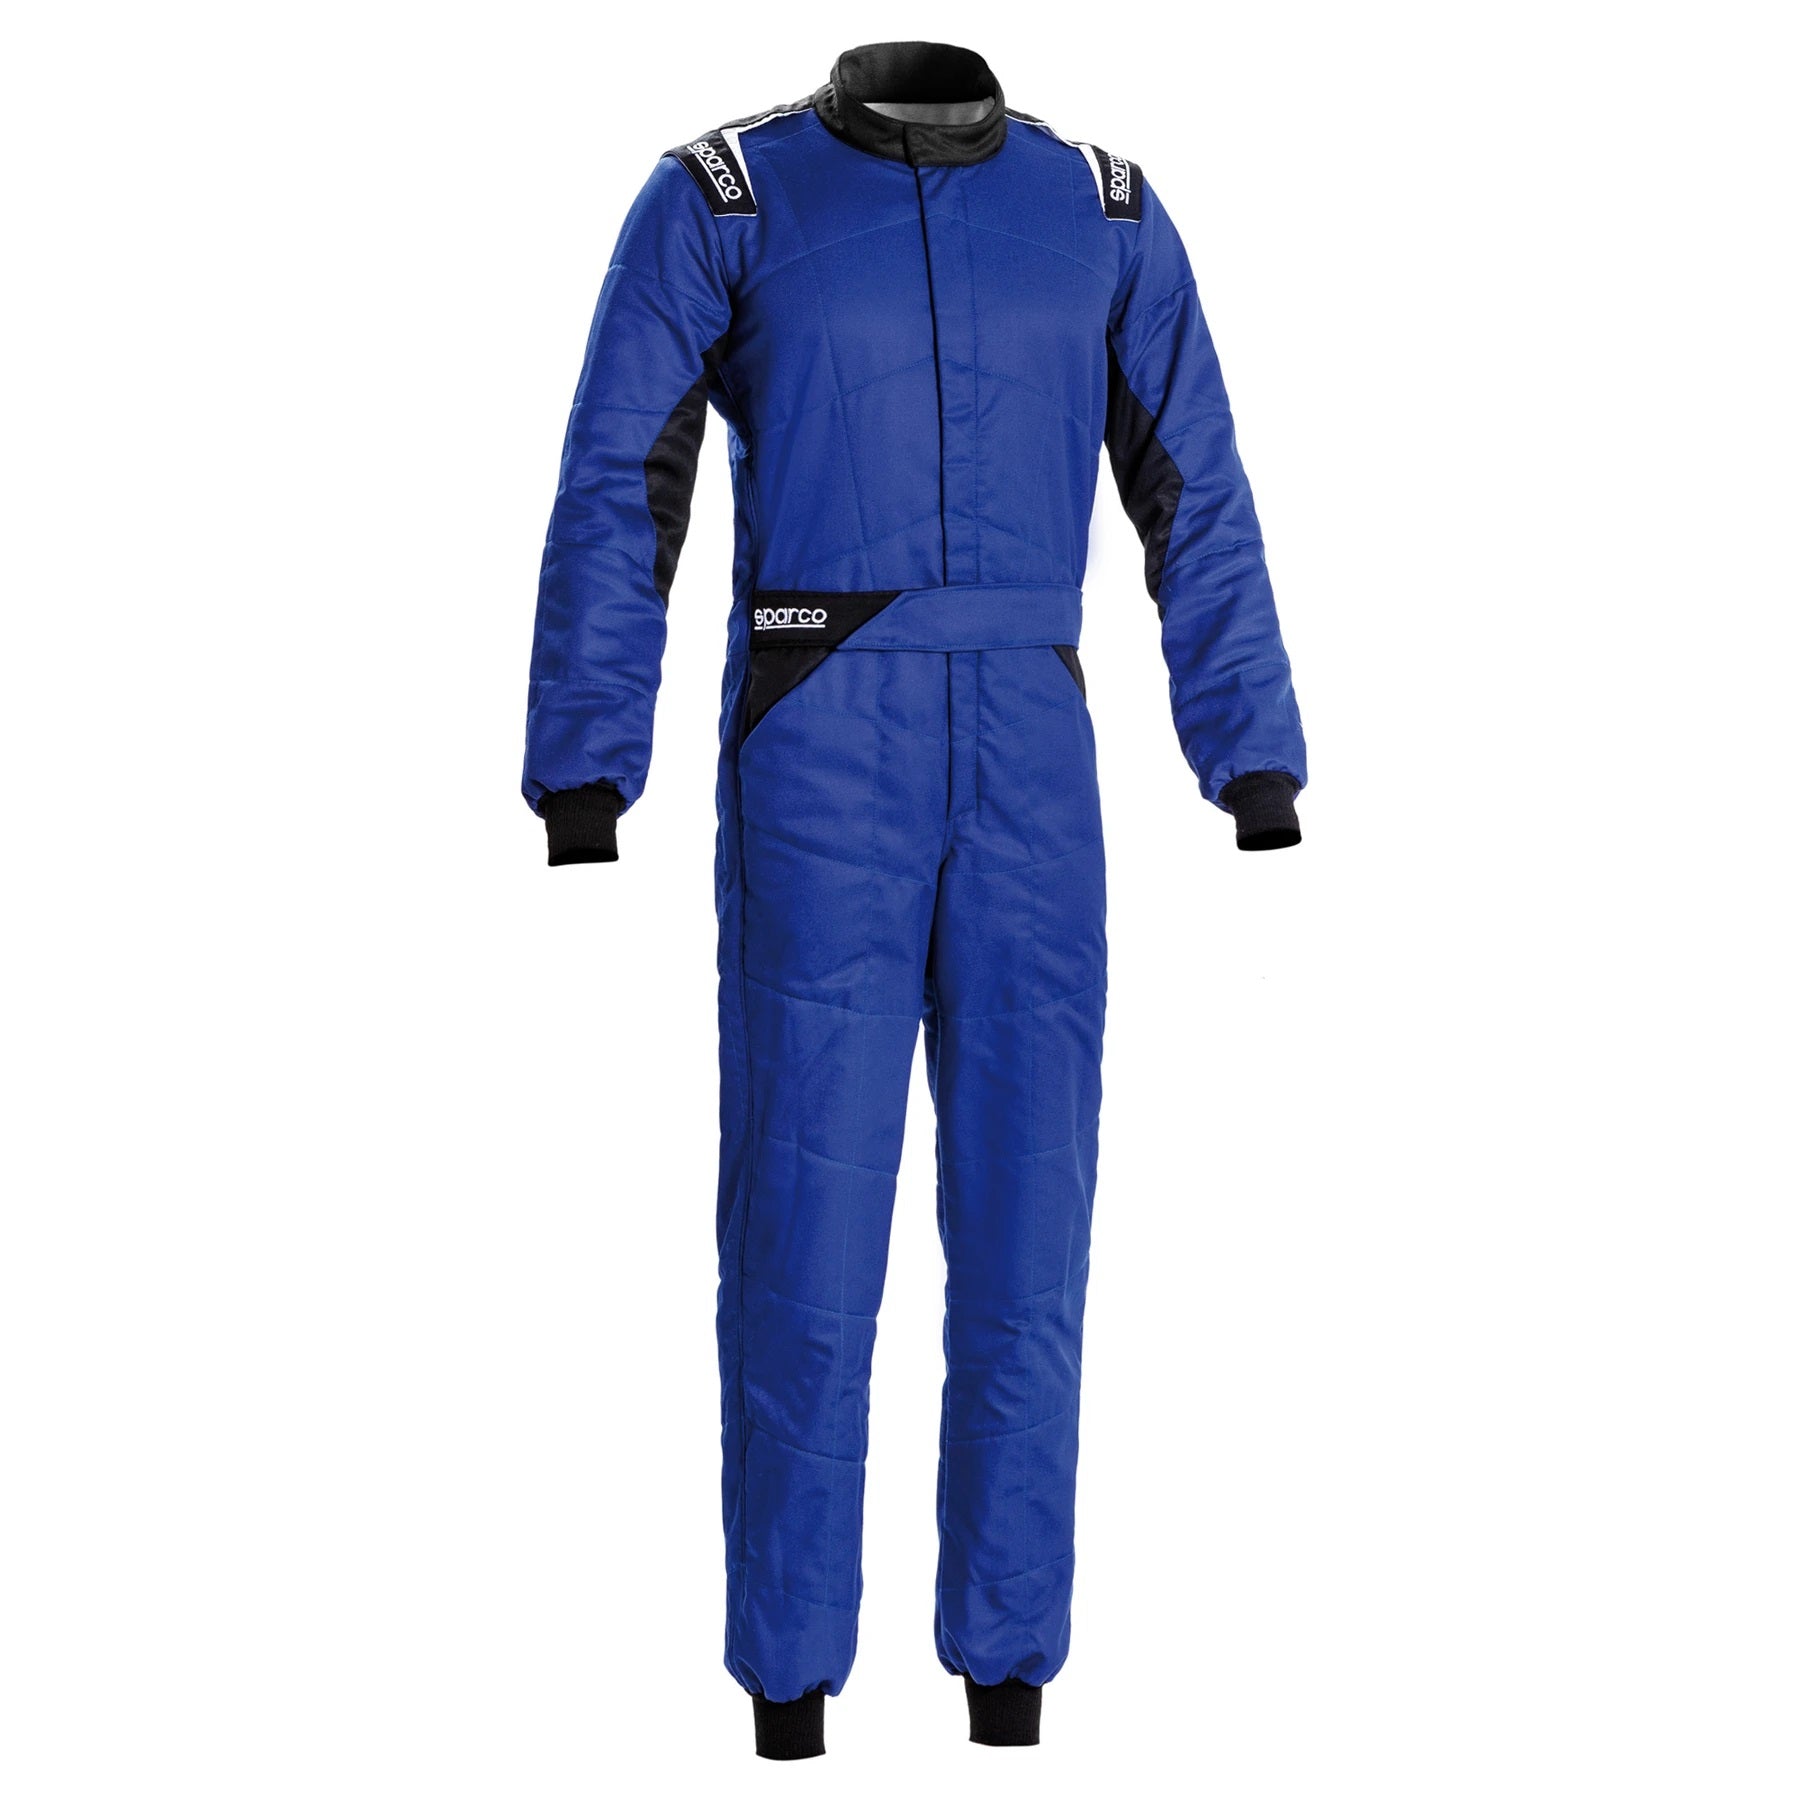 Sparco Driver Suit – Winding Road Racing